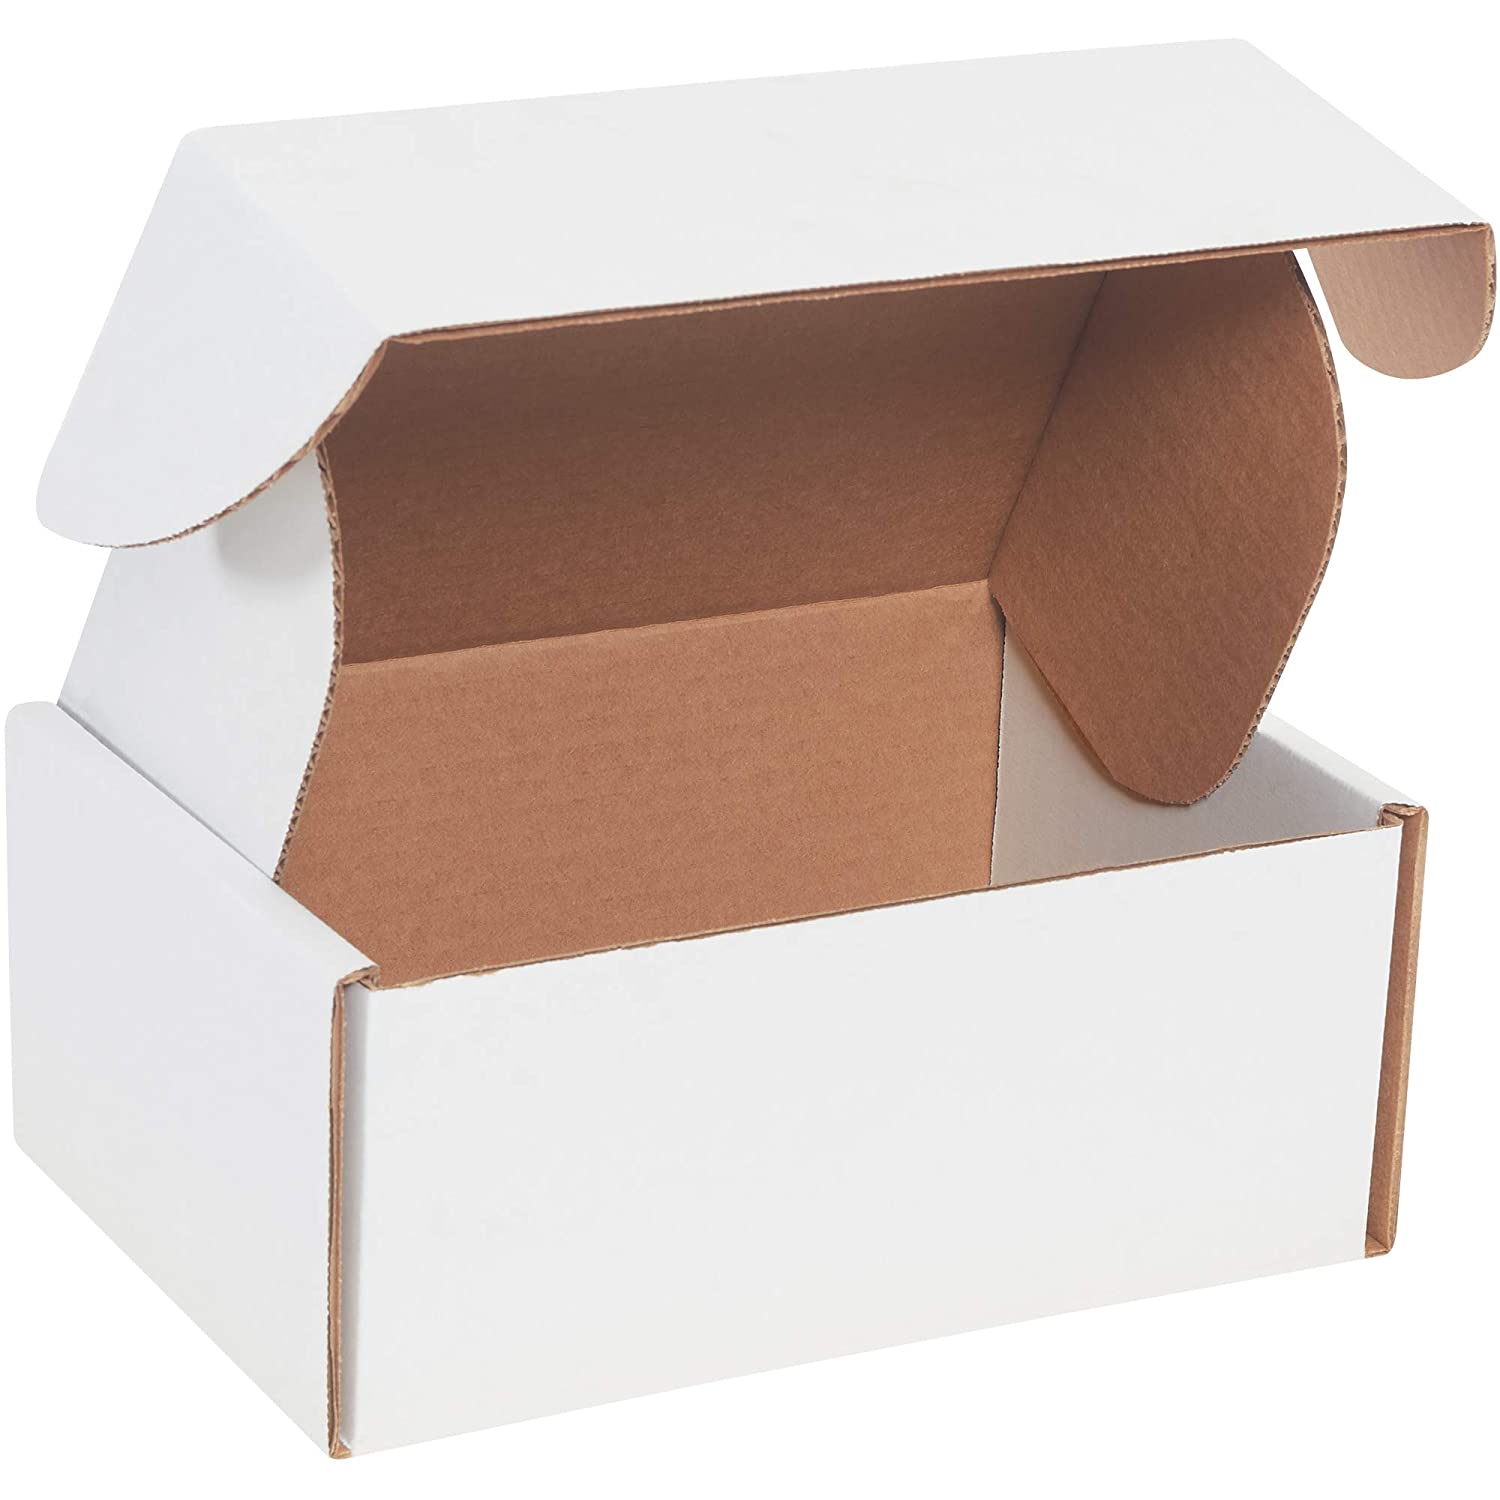 Mailing Box - Office Catch